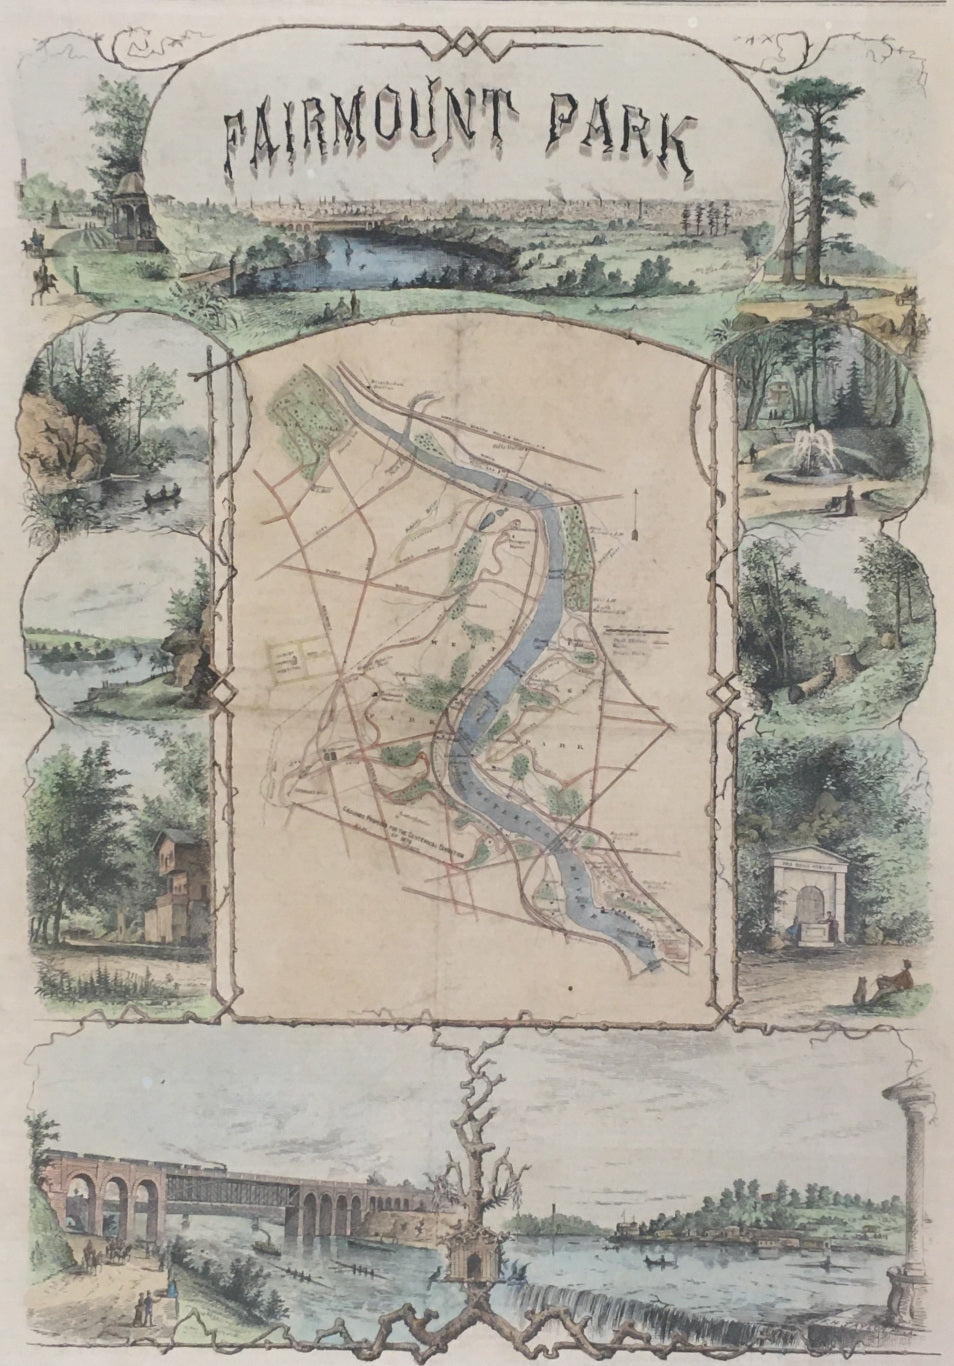 Taylor, Frank H. “Fairmount Park.  Scenes in Fairmount Park, Philadelphia with a Map Showing the Site of the Proposed Centennial Buildings”